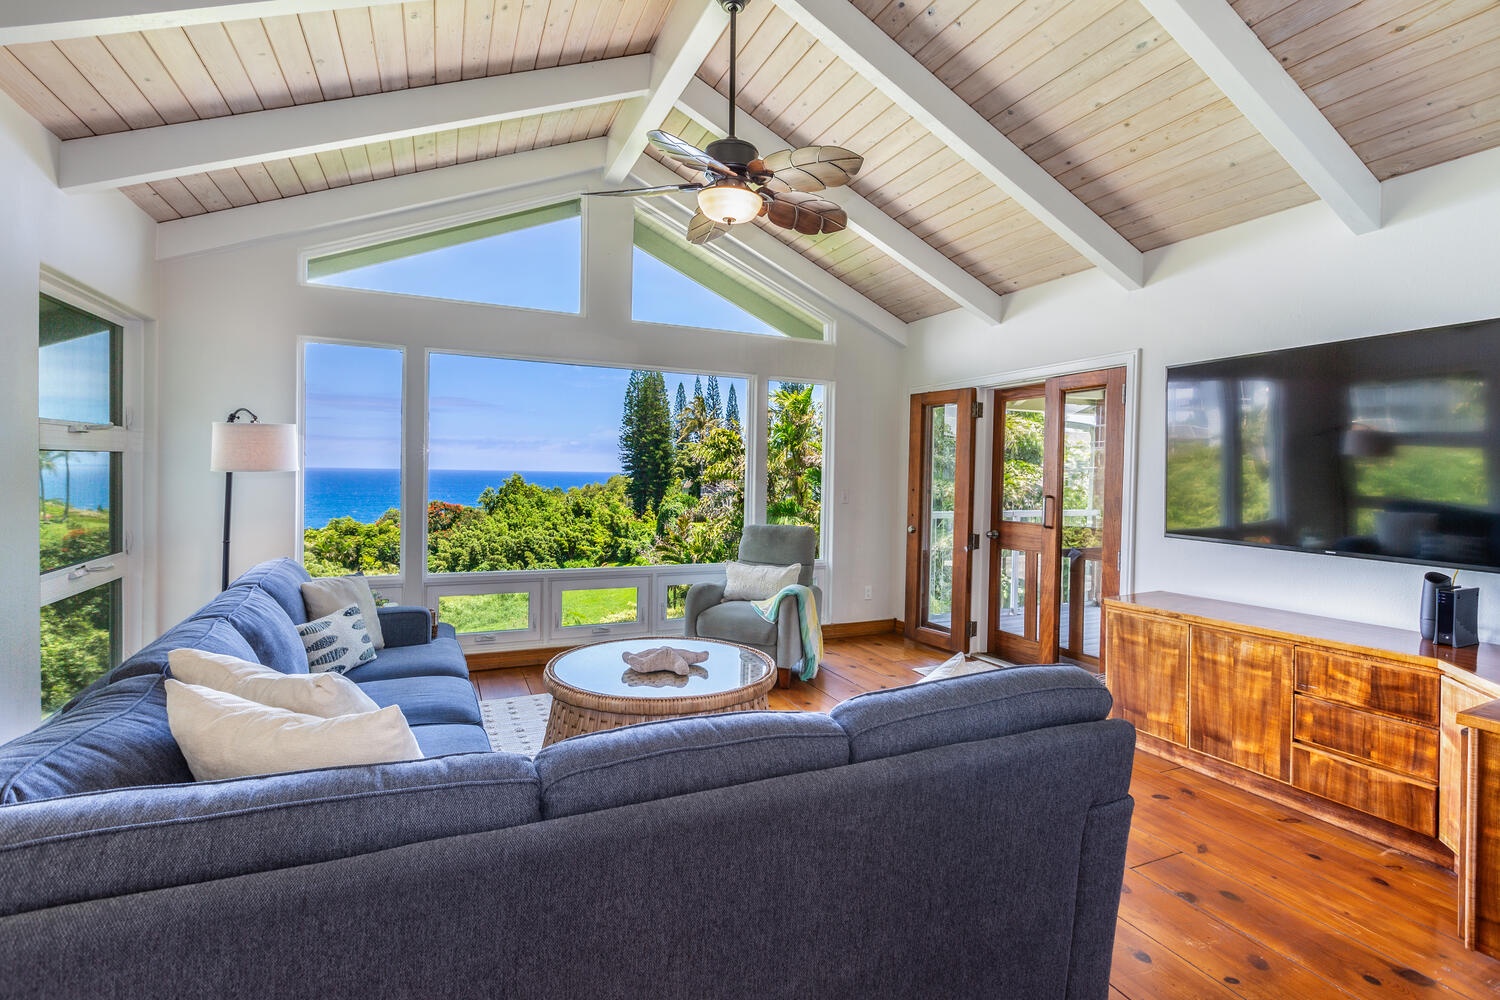 Princeville Vacation Rentals, Wai Lani - Our spacious living area is a sanctuary of light, offering a peaceful space to relax and rejuvenate.